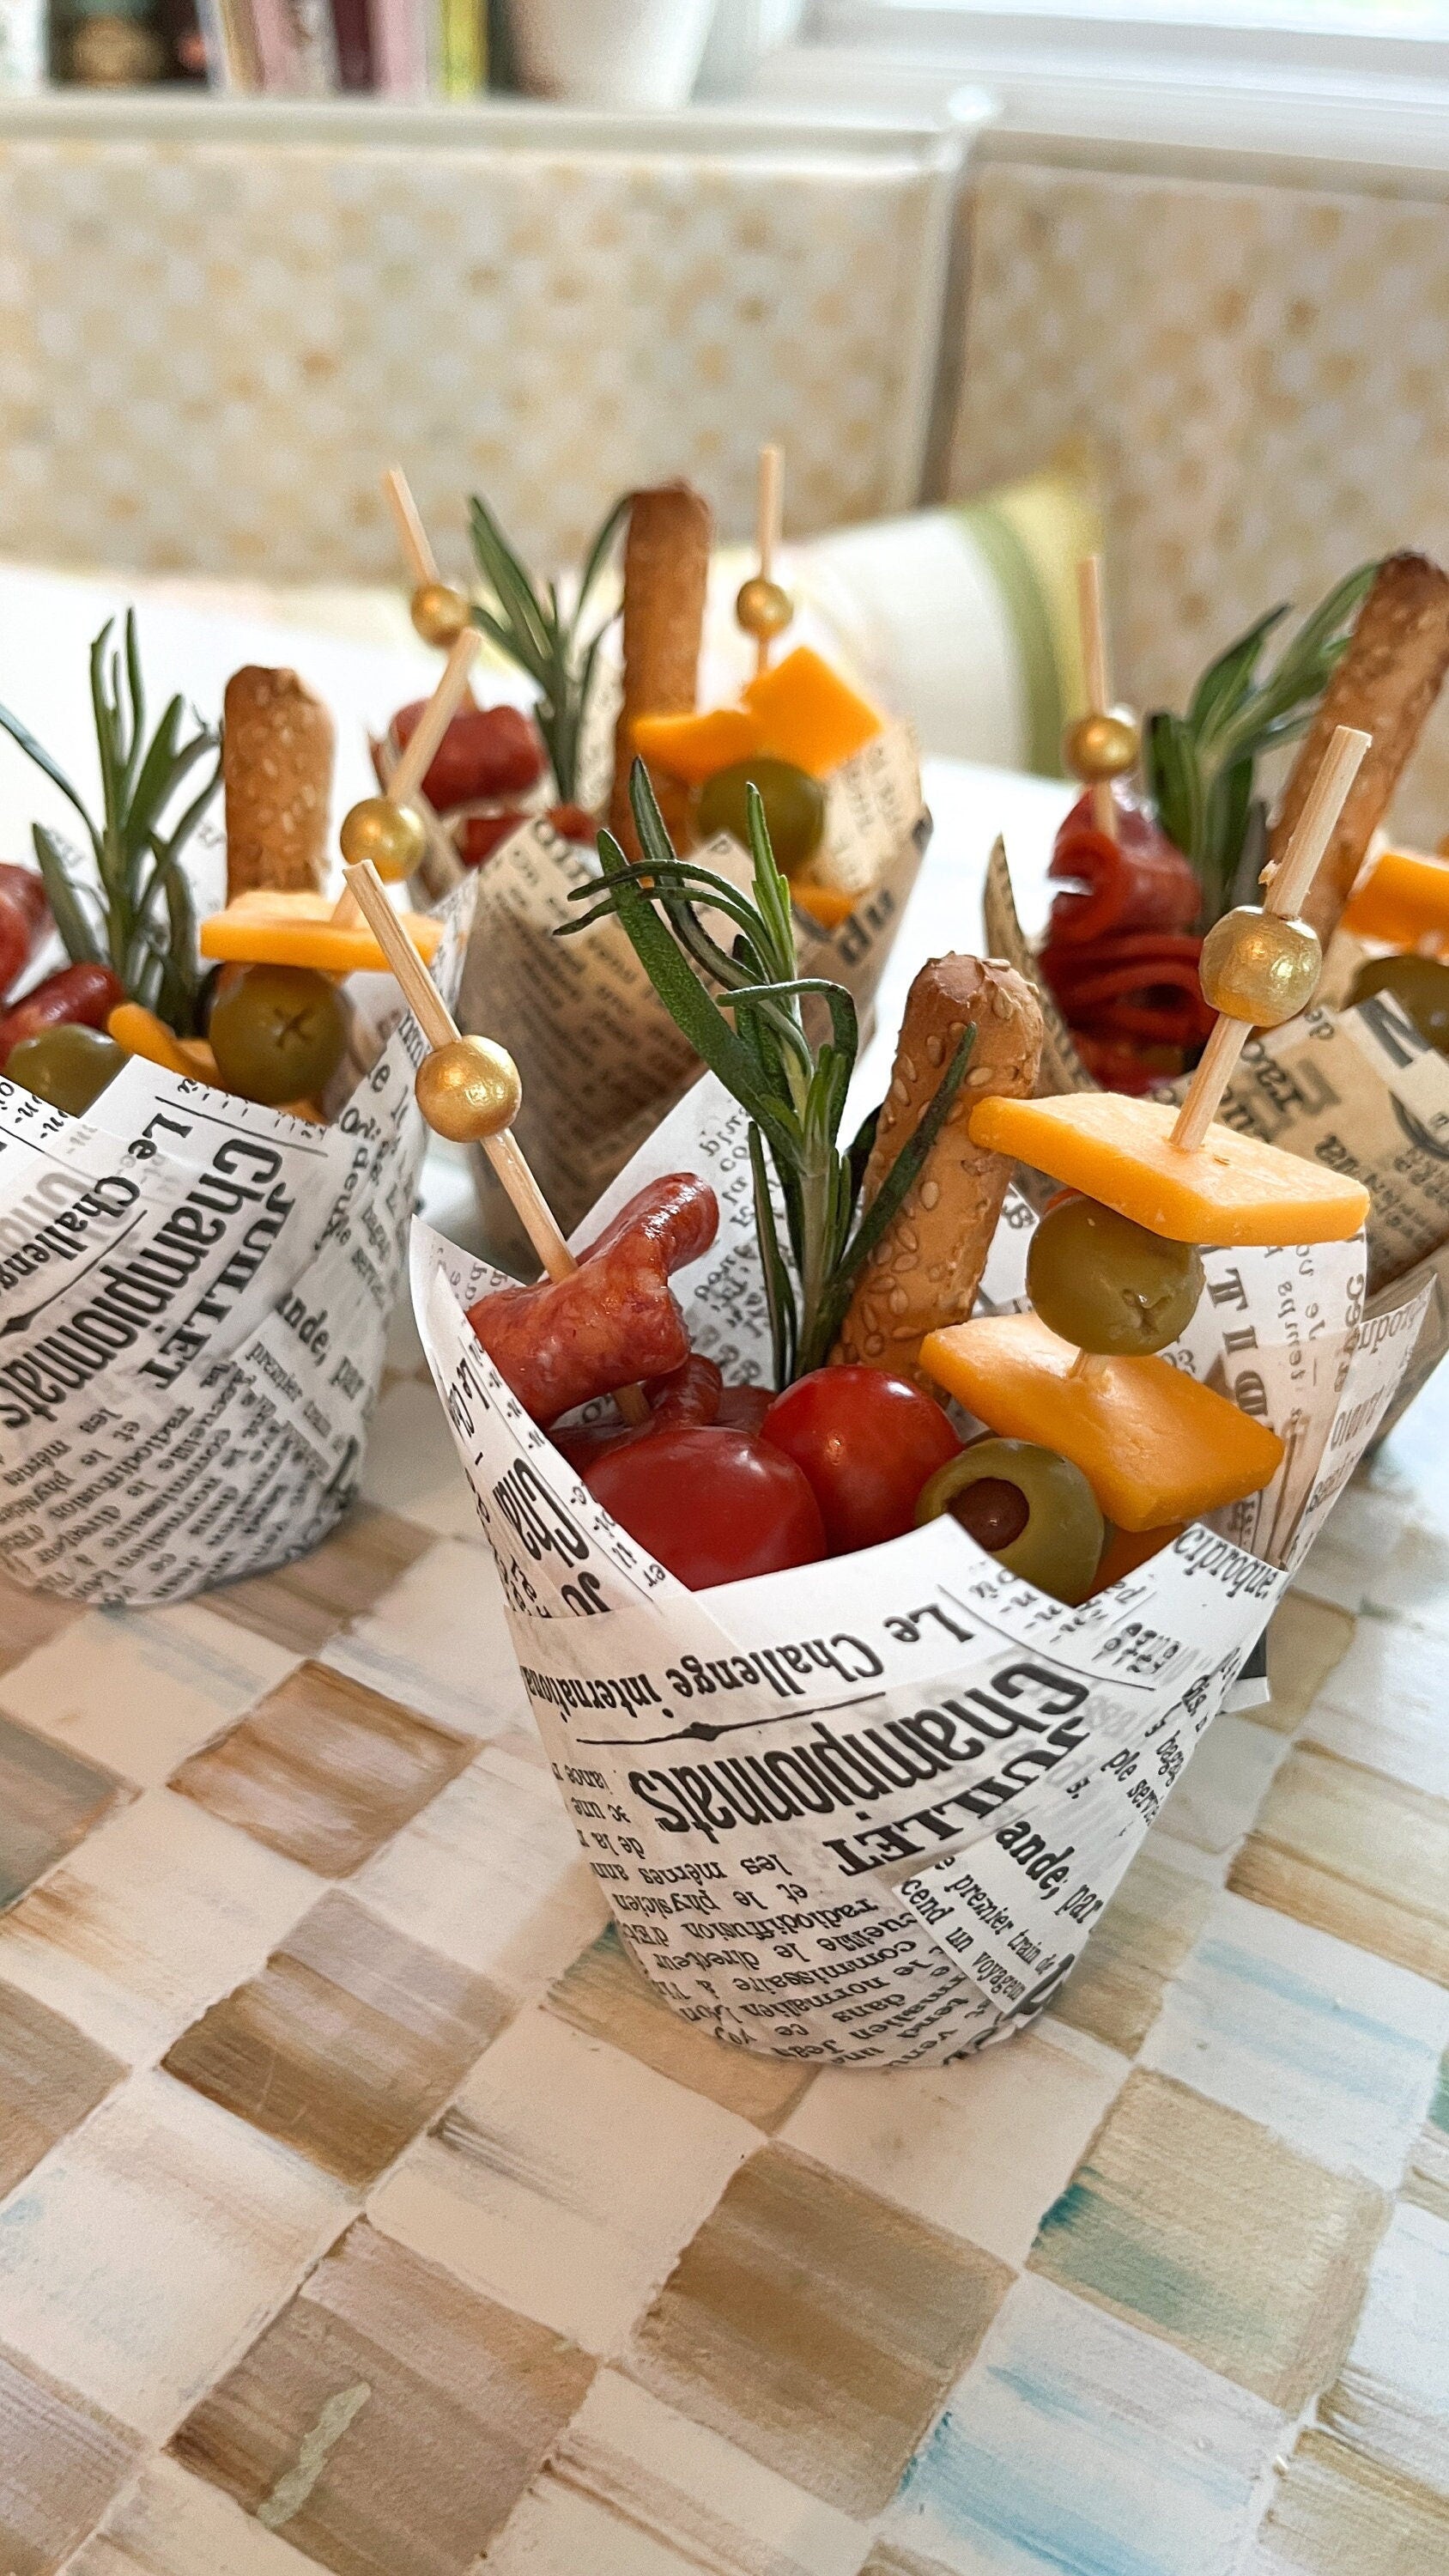 12oz Pre-Printed Charcuterie Cups, Disposable Cardboard Paper